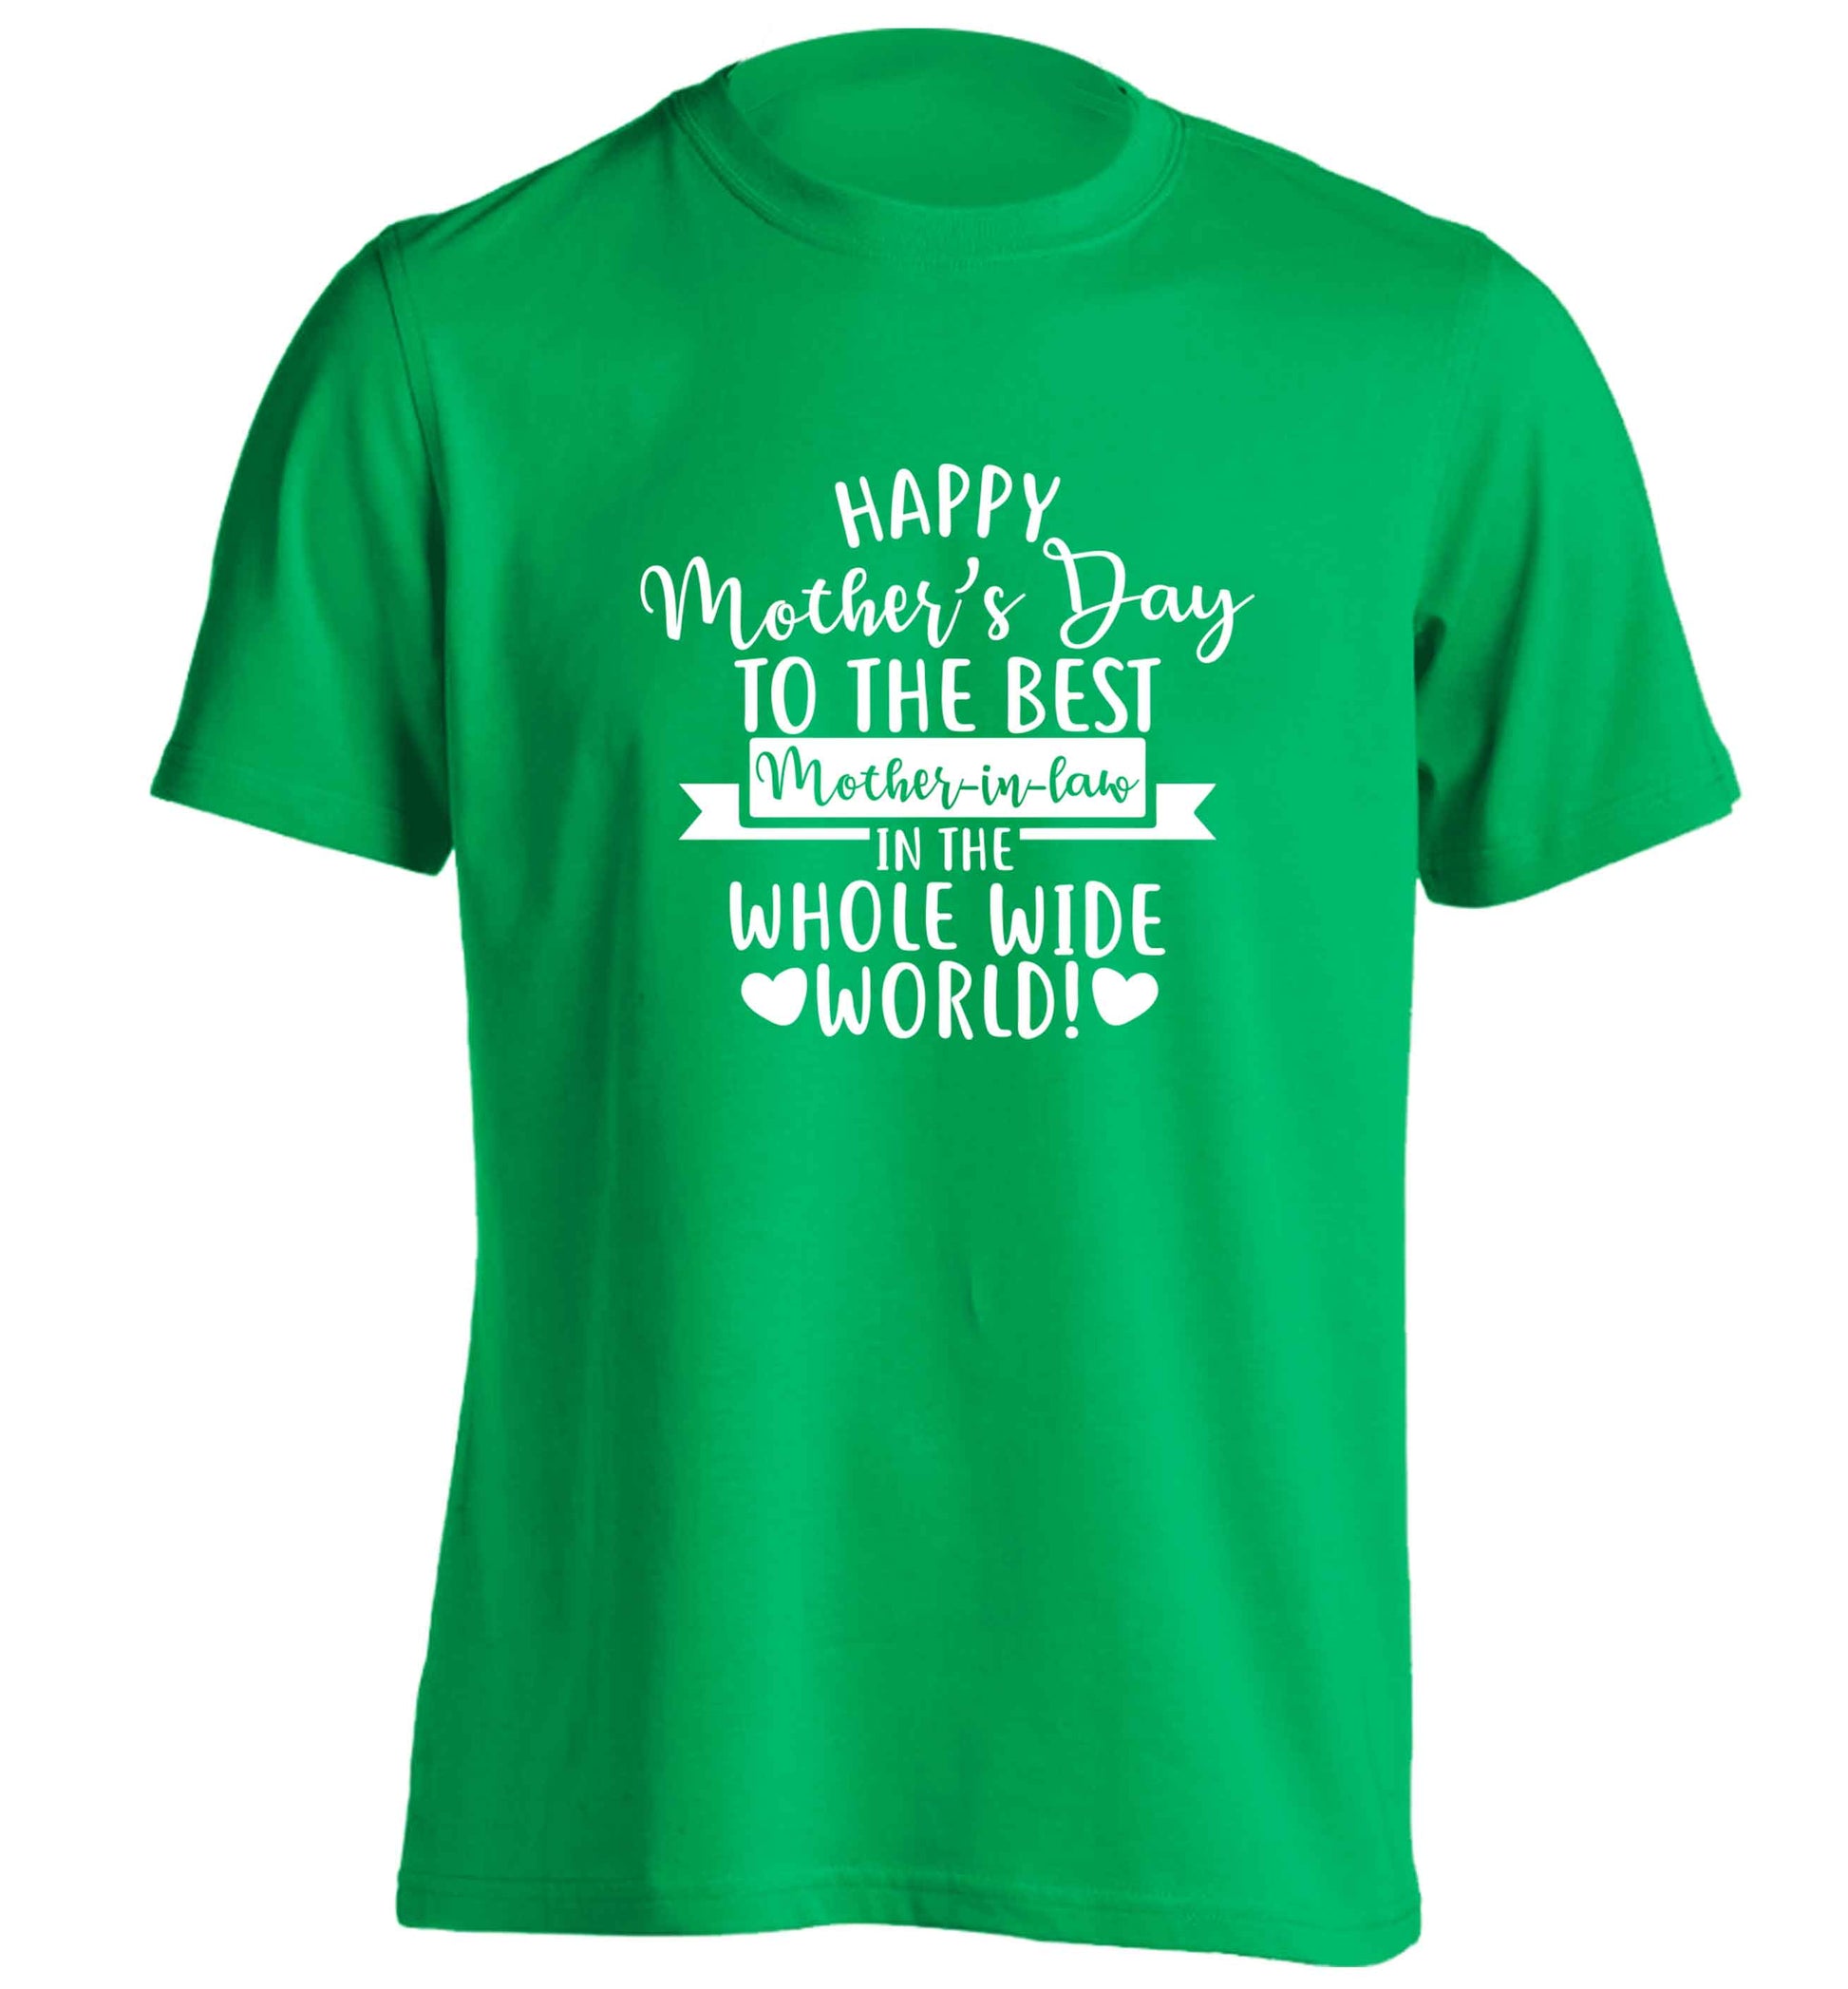 Happy mother's day to the best mother-in law in the world adults unisex green Tshirt 2XL